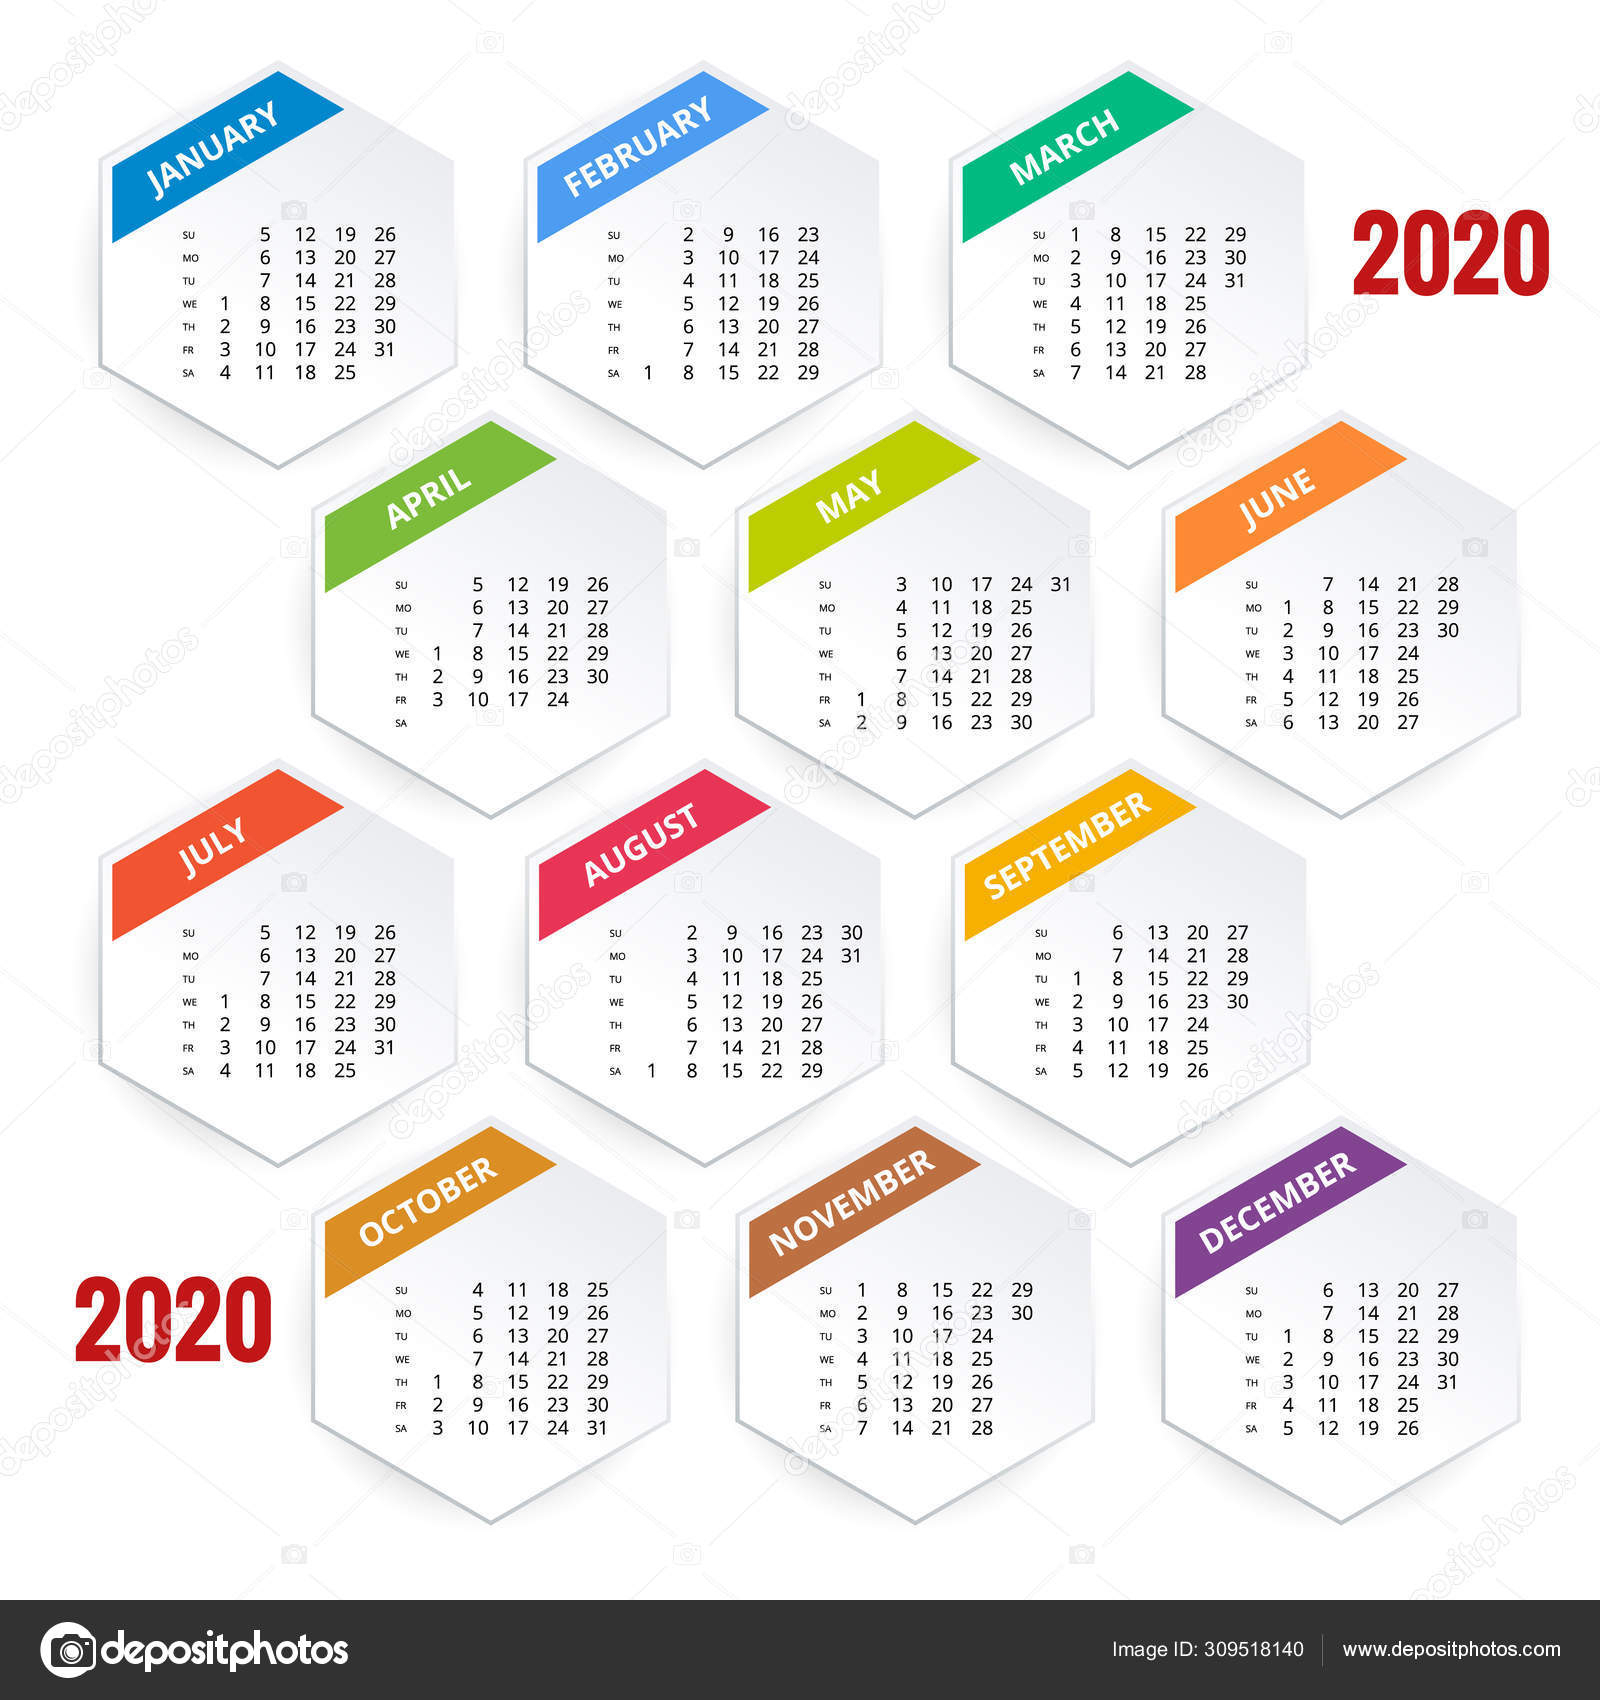 Calendar Of Events Template 2020 - Wpa.wpart.co